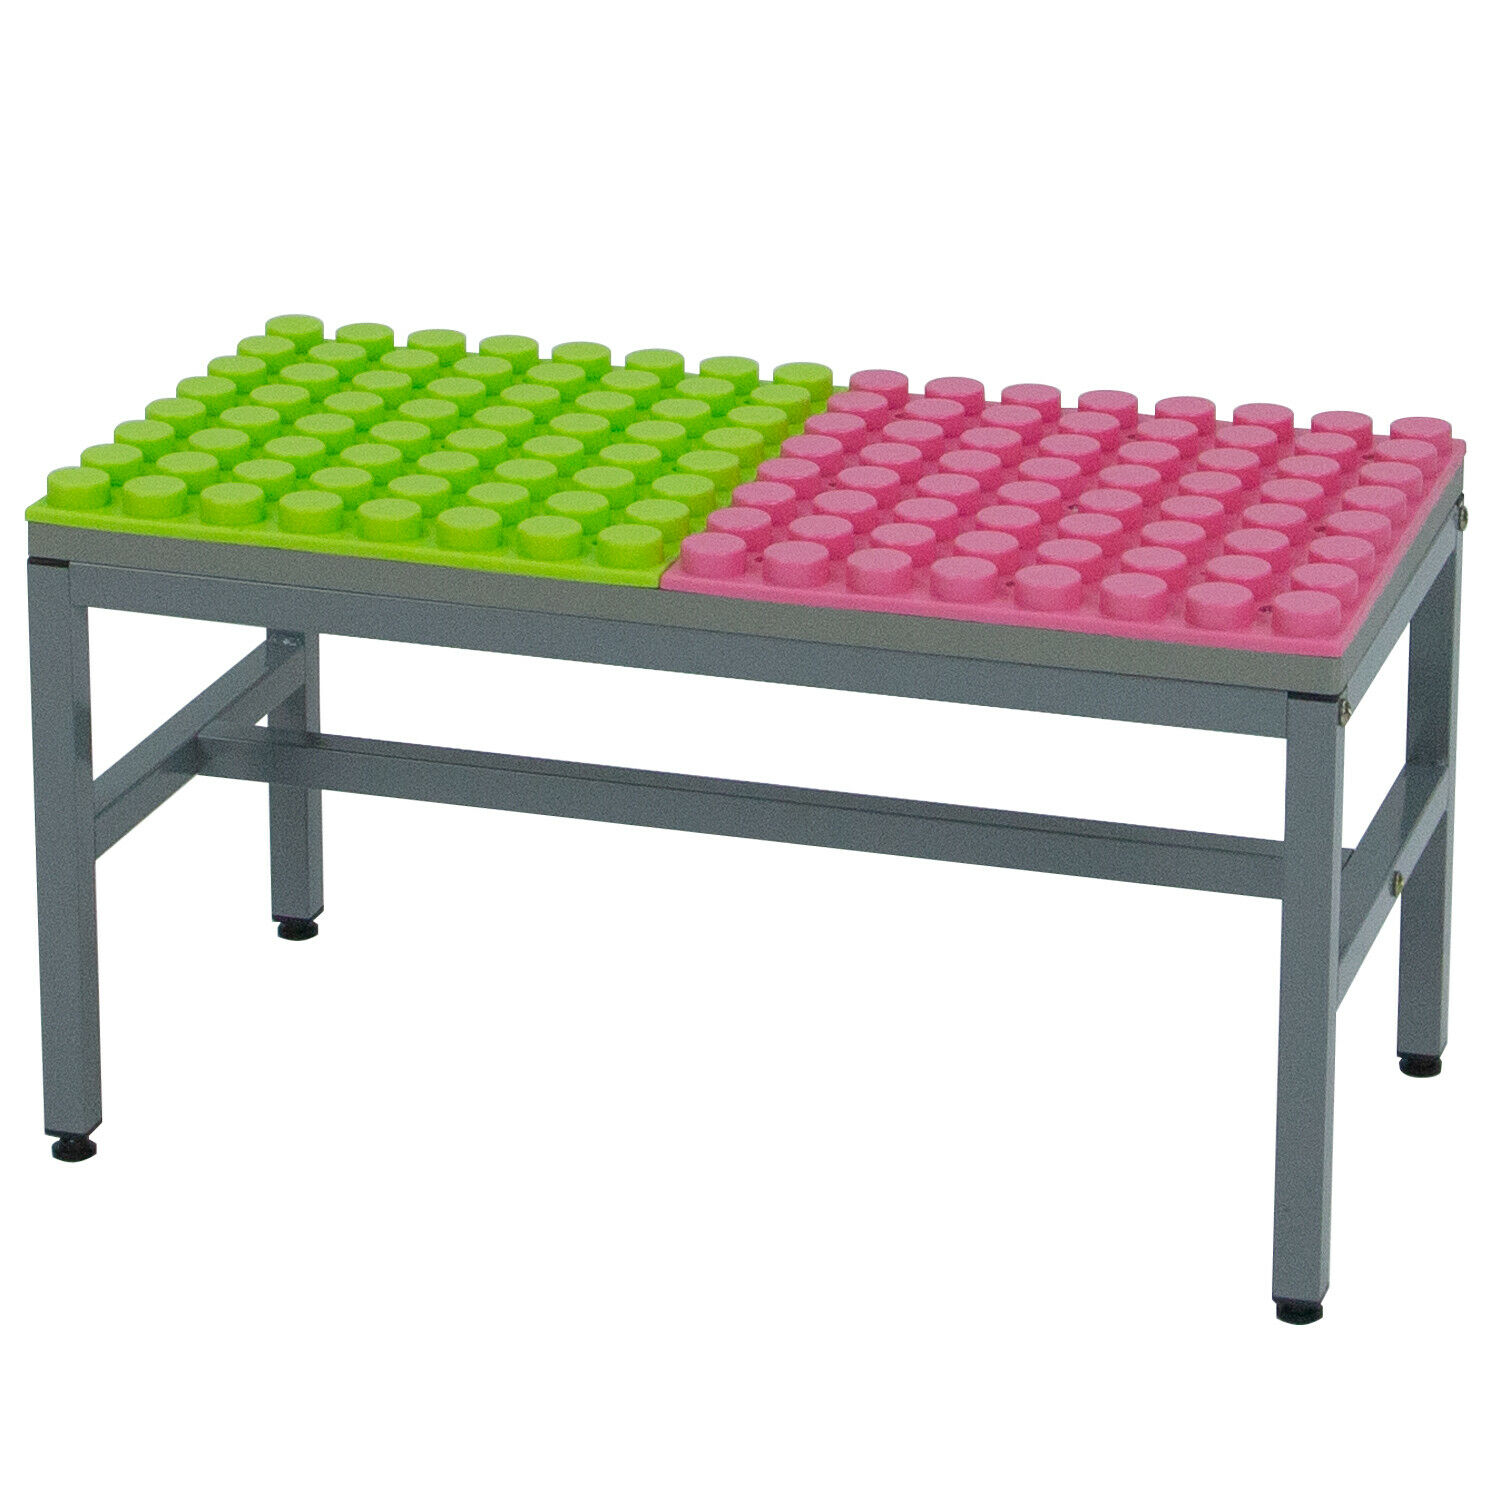 UNiPLAY Soft Building Blocks Table, Building Base and Play Station